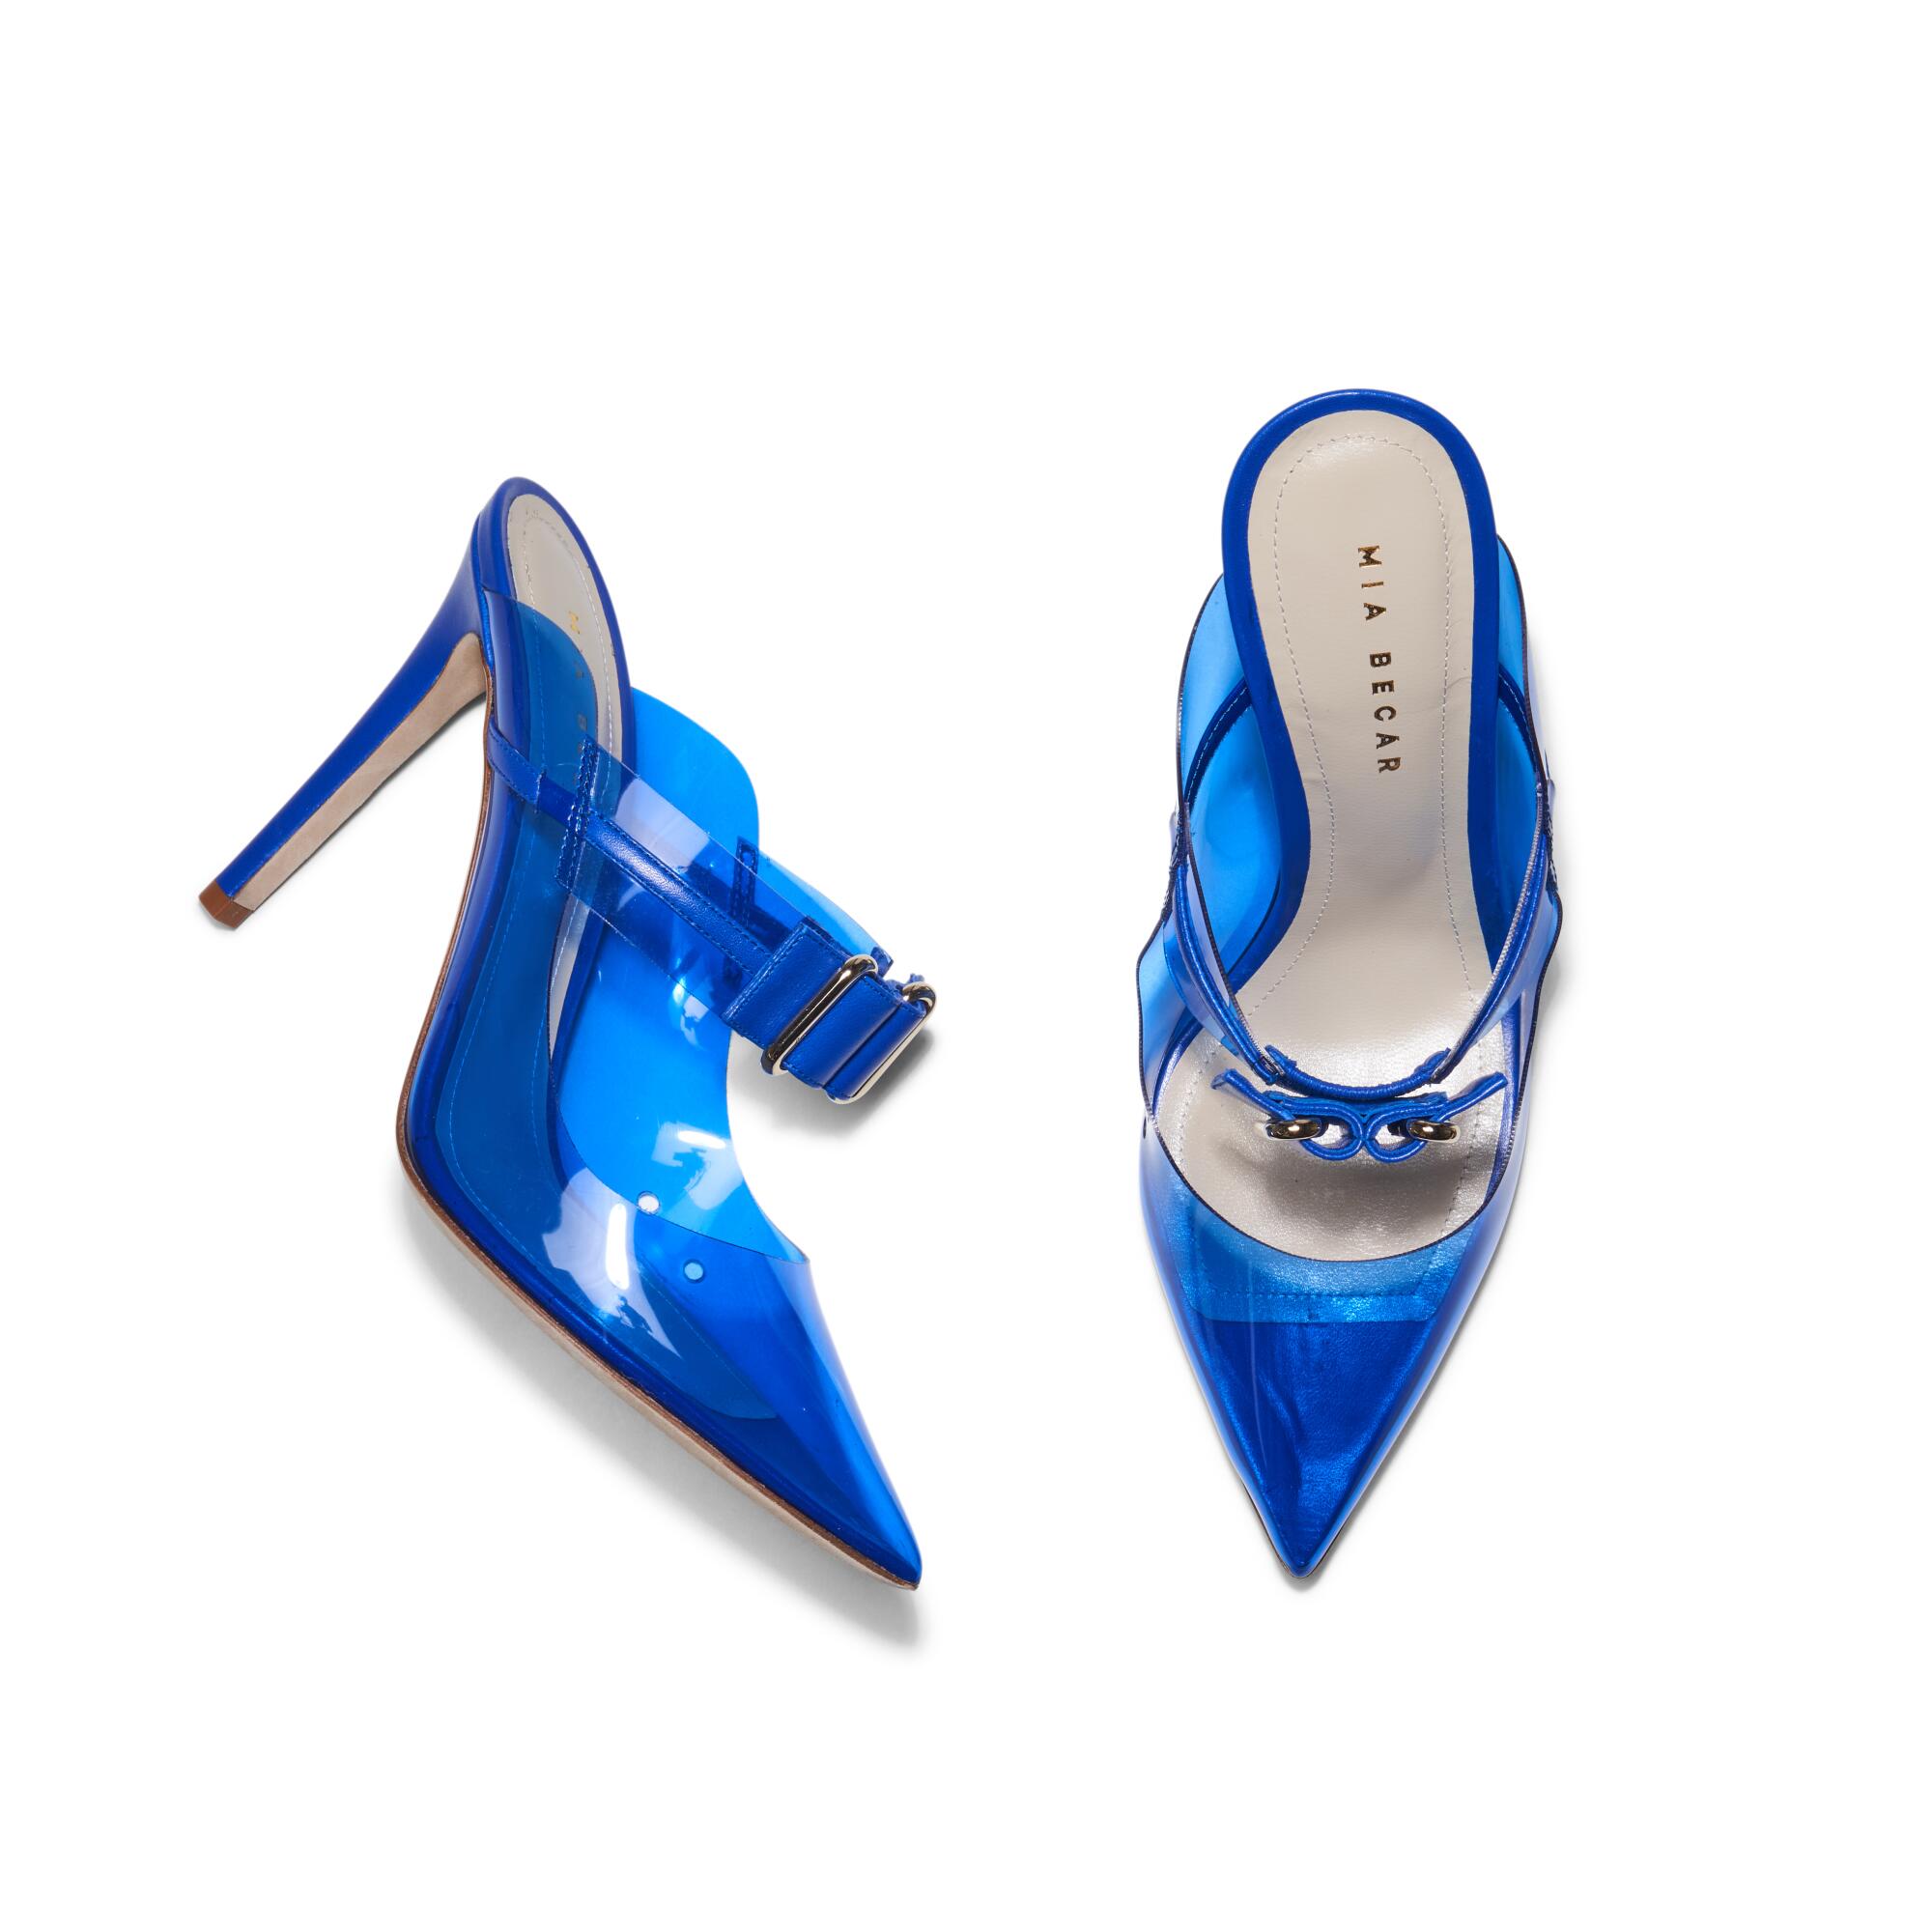 Blue high-heeled shoes by Mia Becar.